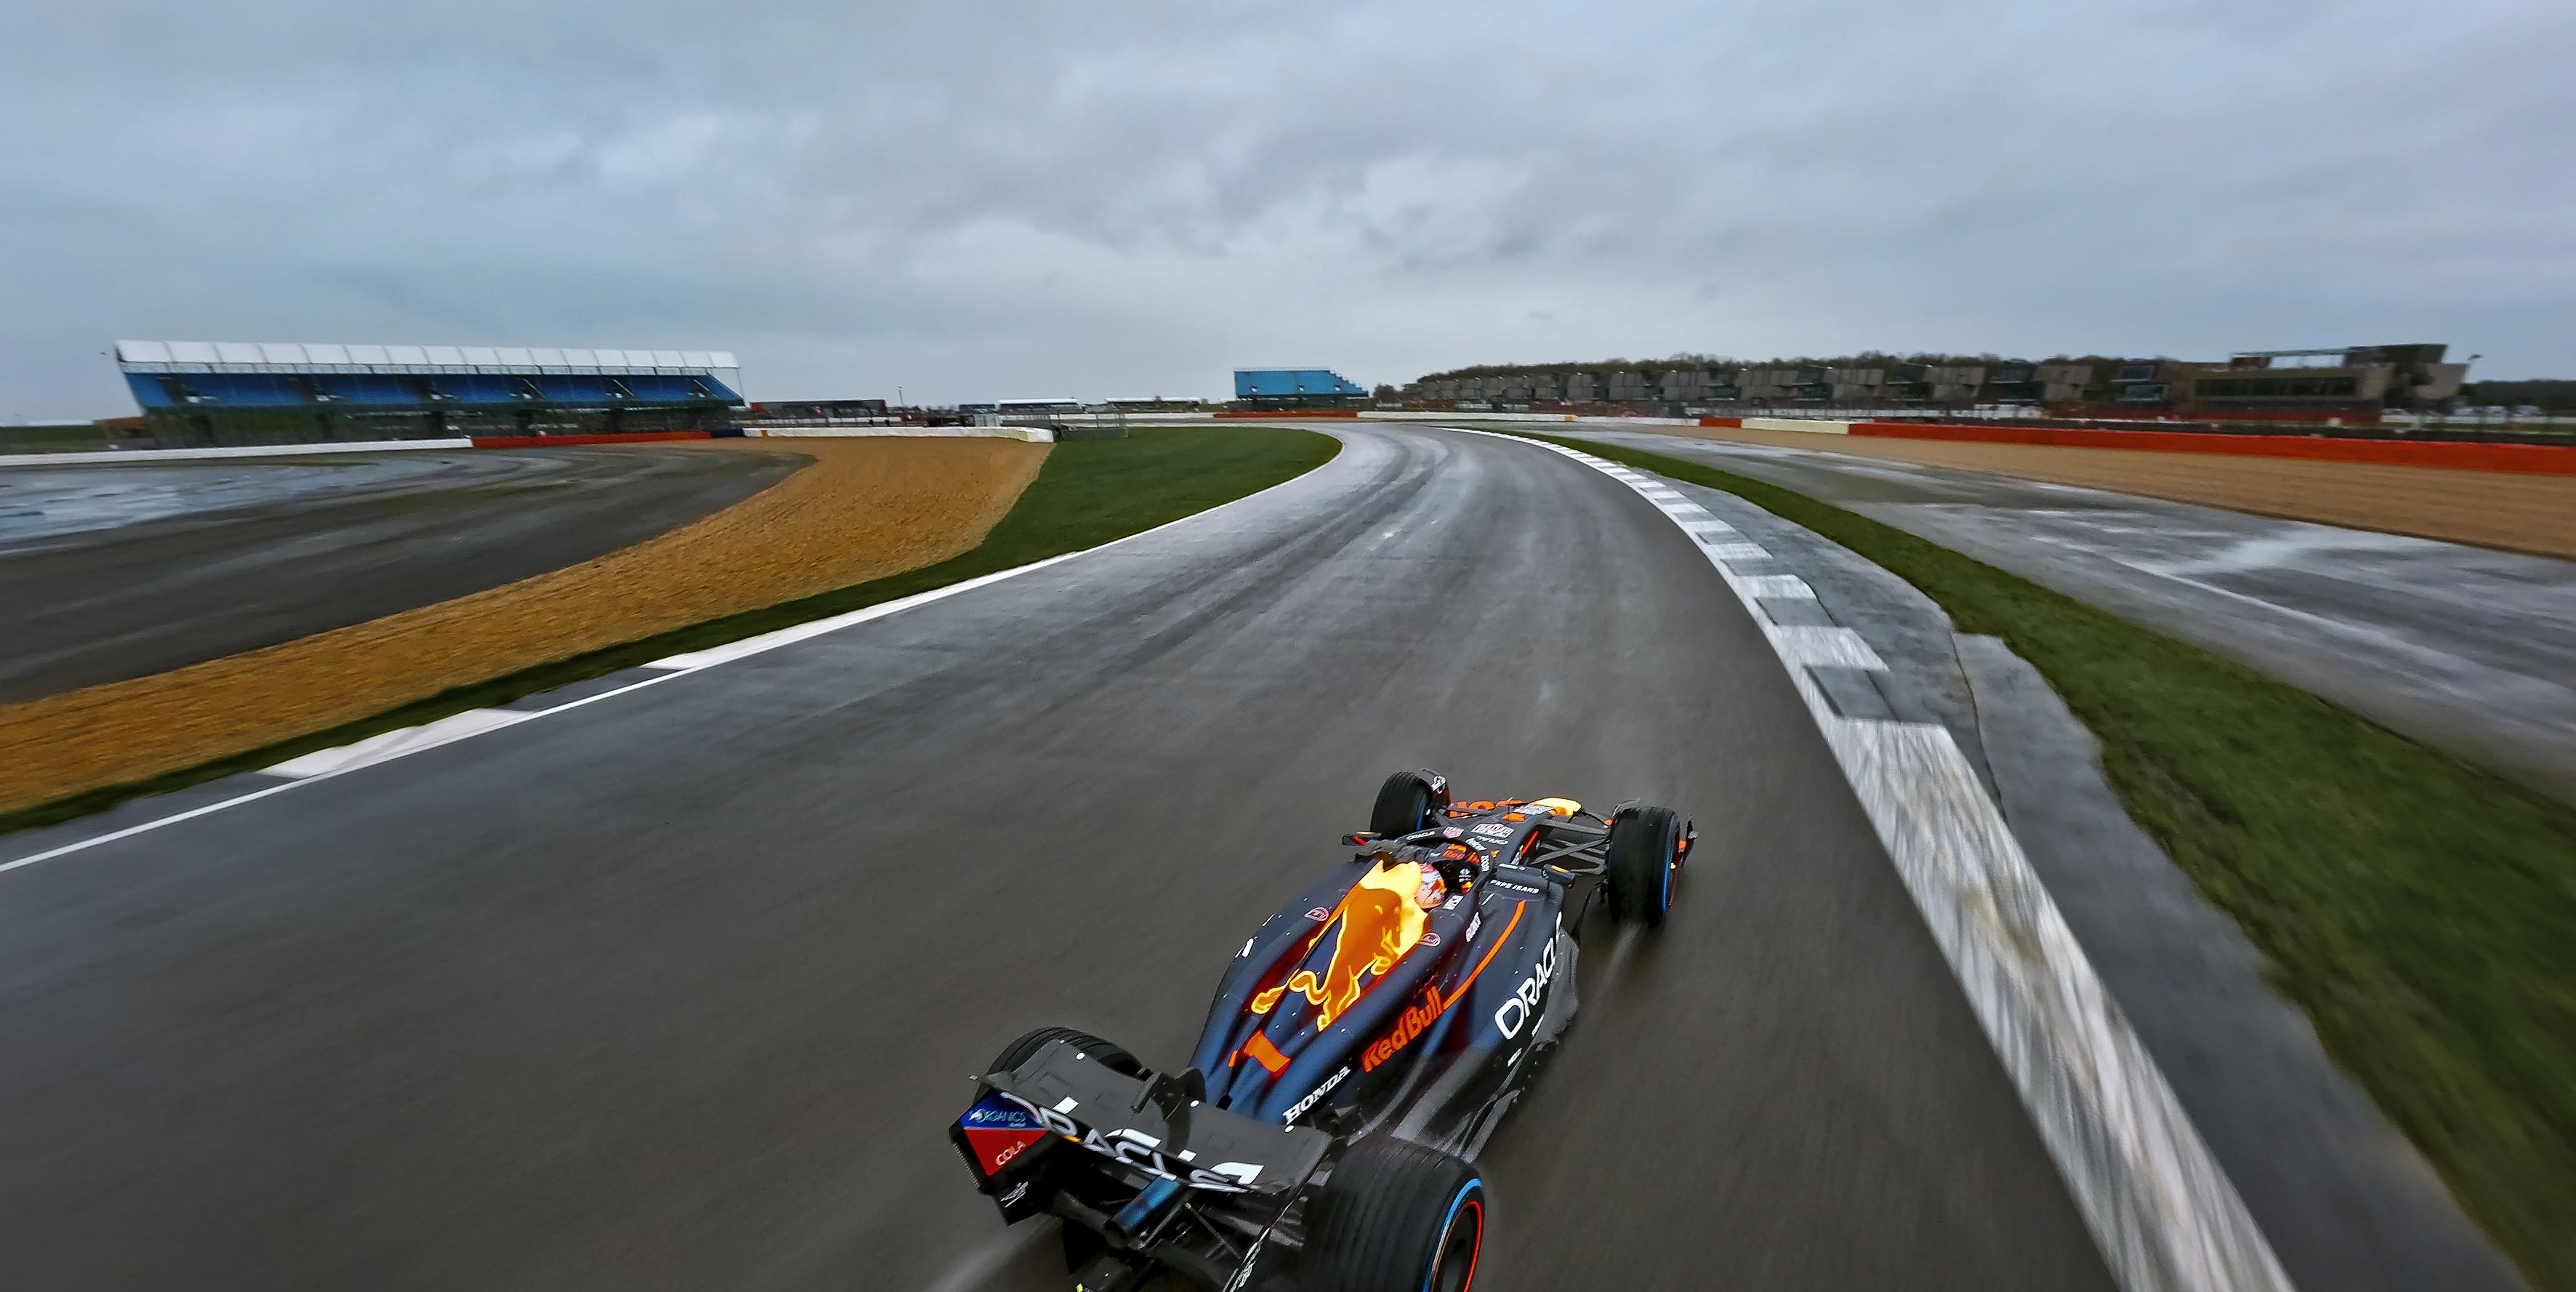 Video: 217 MPH Drone Chases F1 Champ Max Verstappen around Silverstone